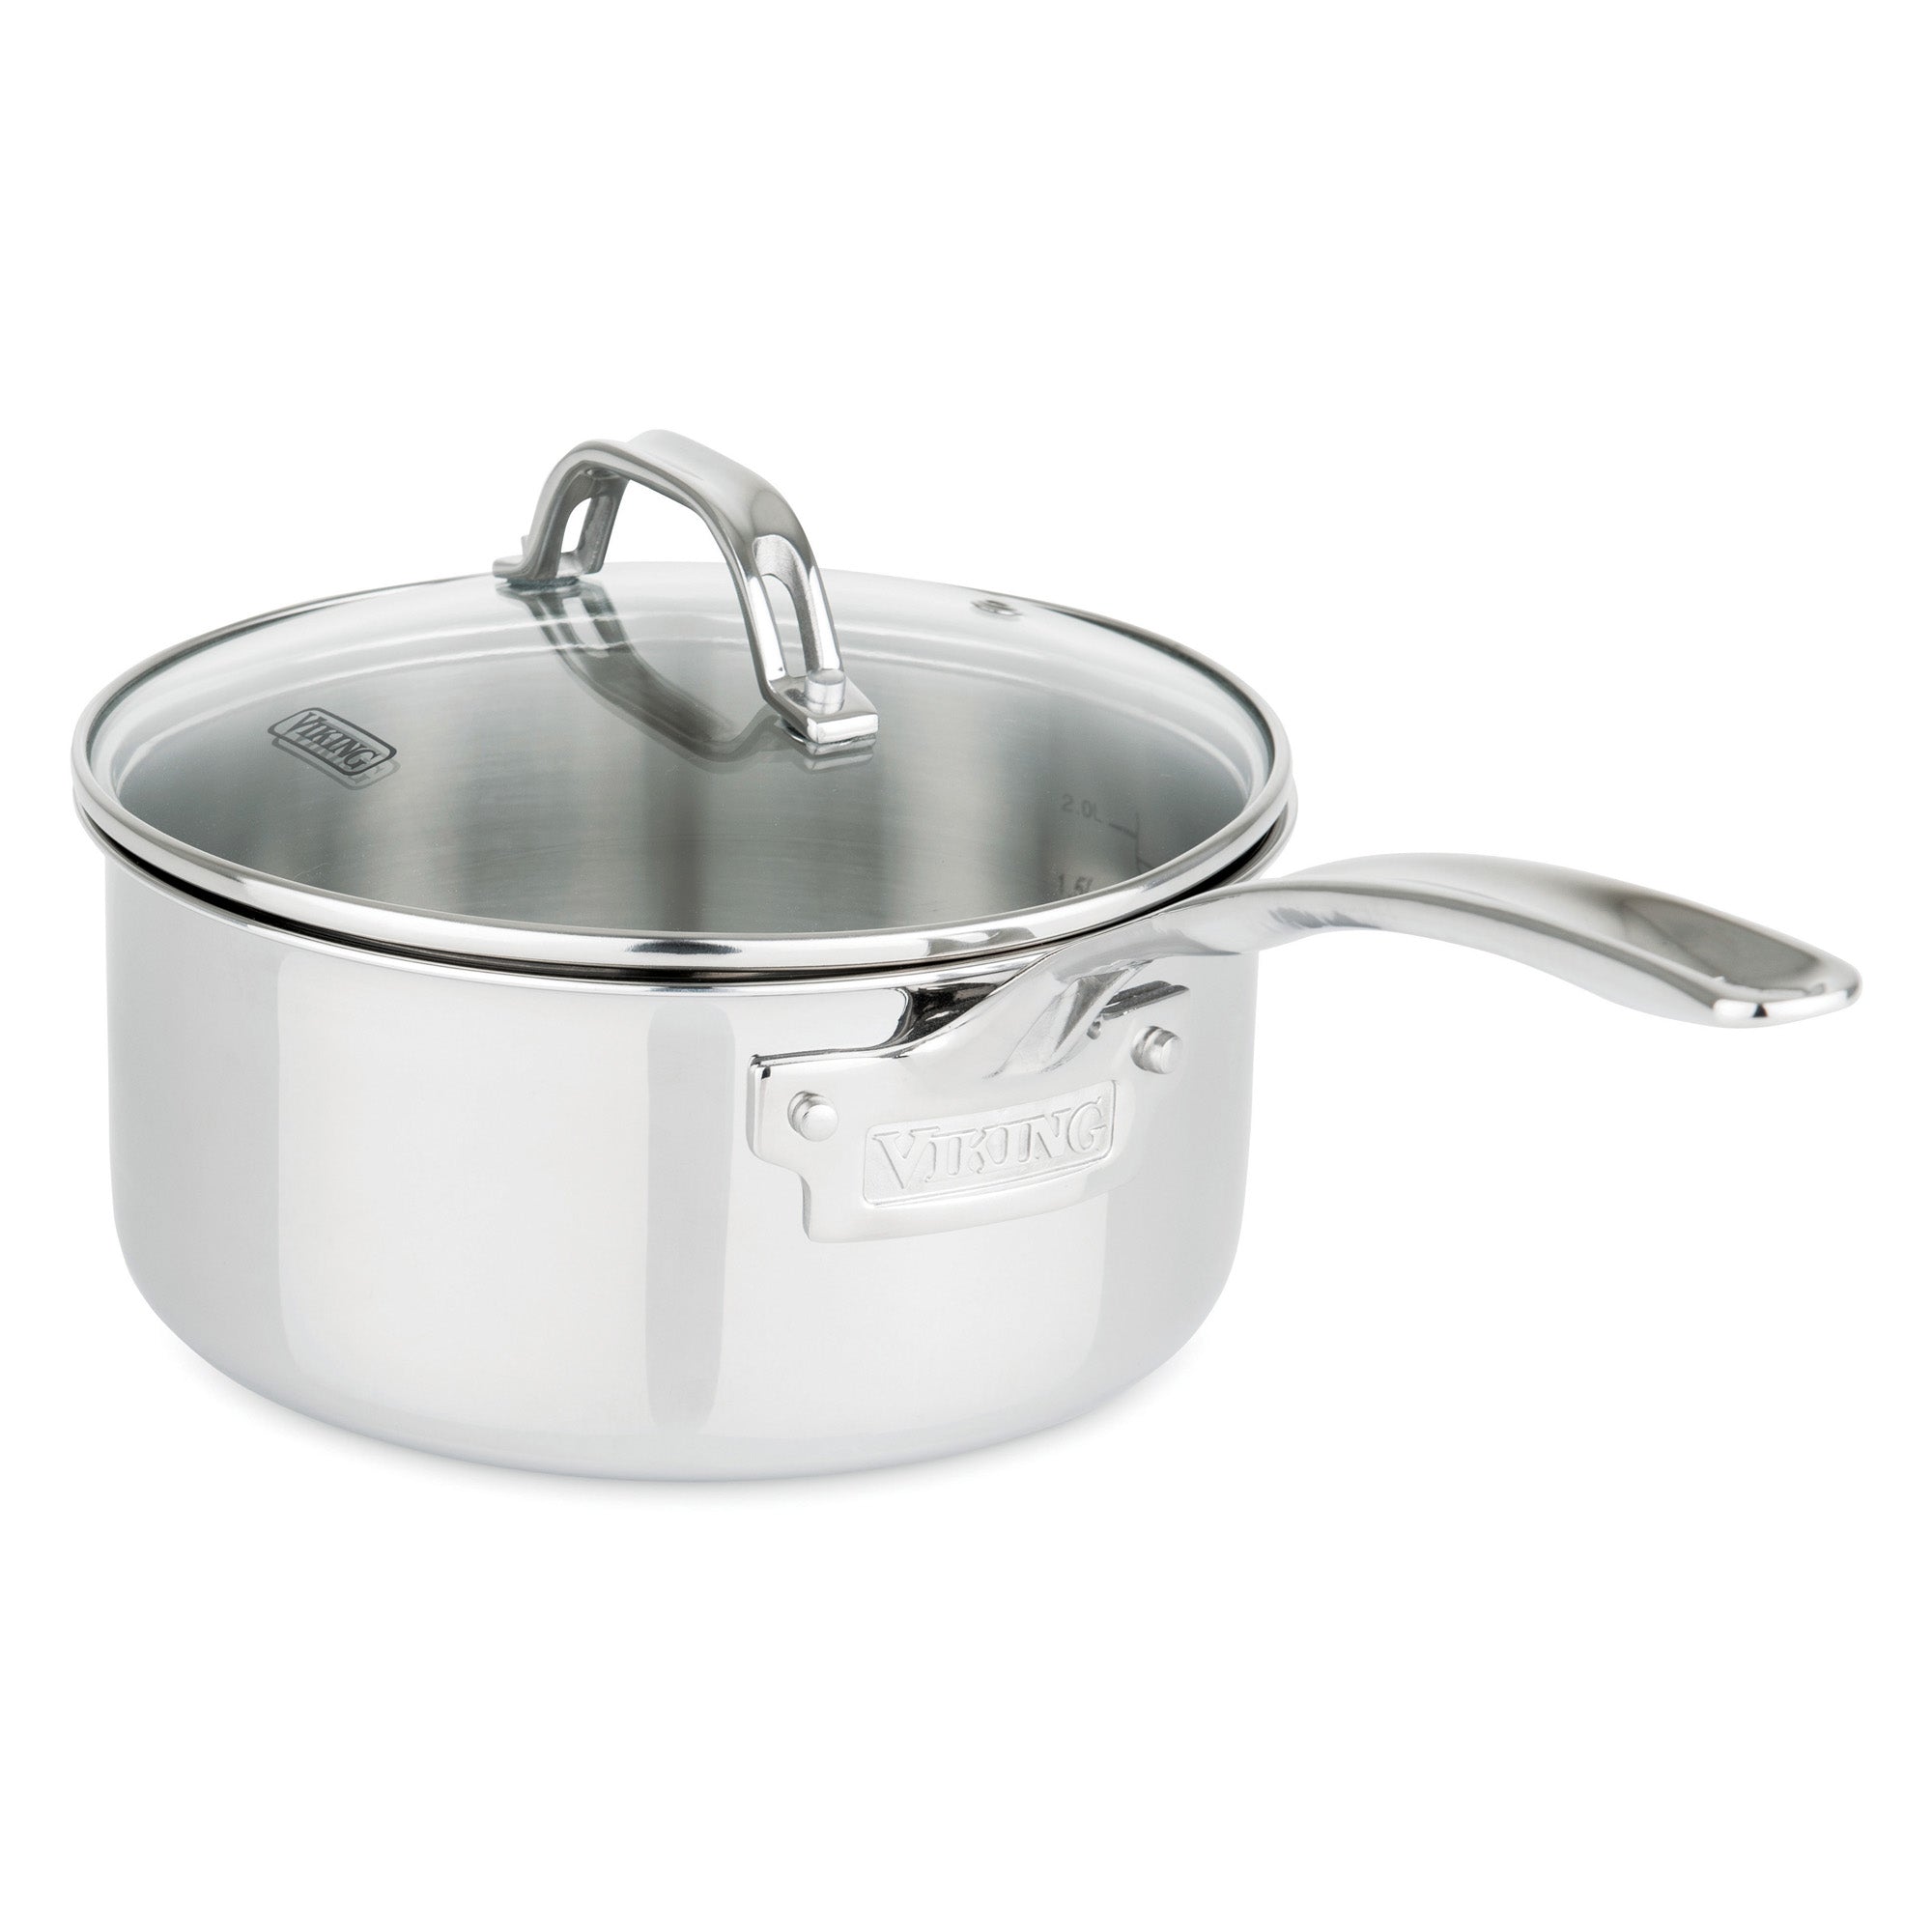 Cook N Home Stainless Steel Saucepan 3 Quart, Tri-Ply Full Clad Sauce Pan  with Glass Lid, Silver 